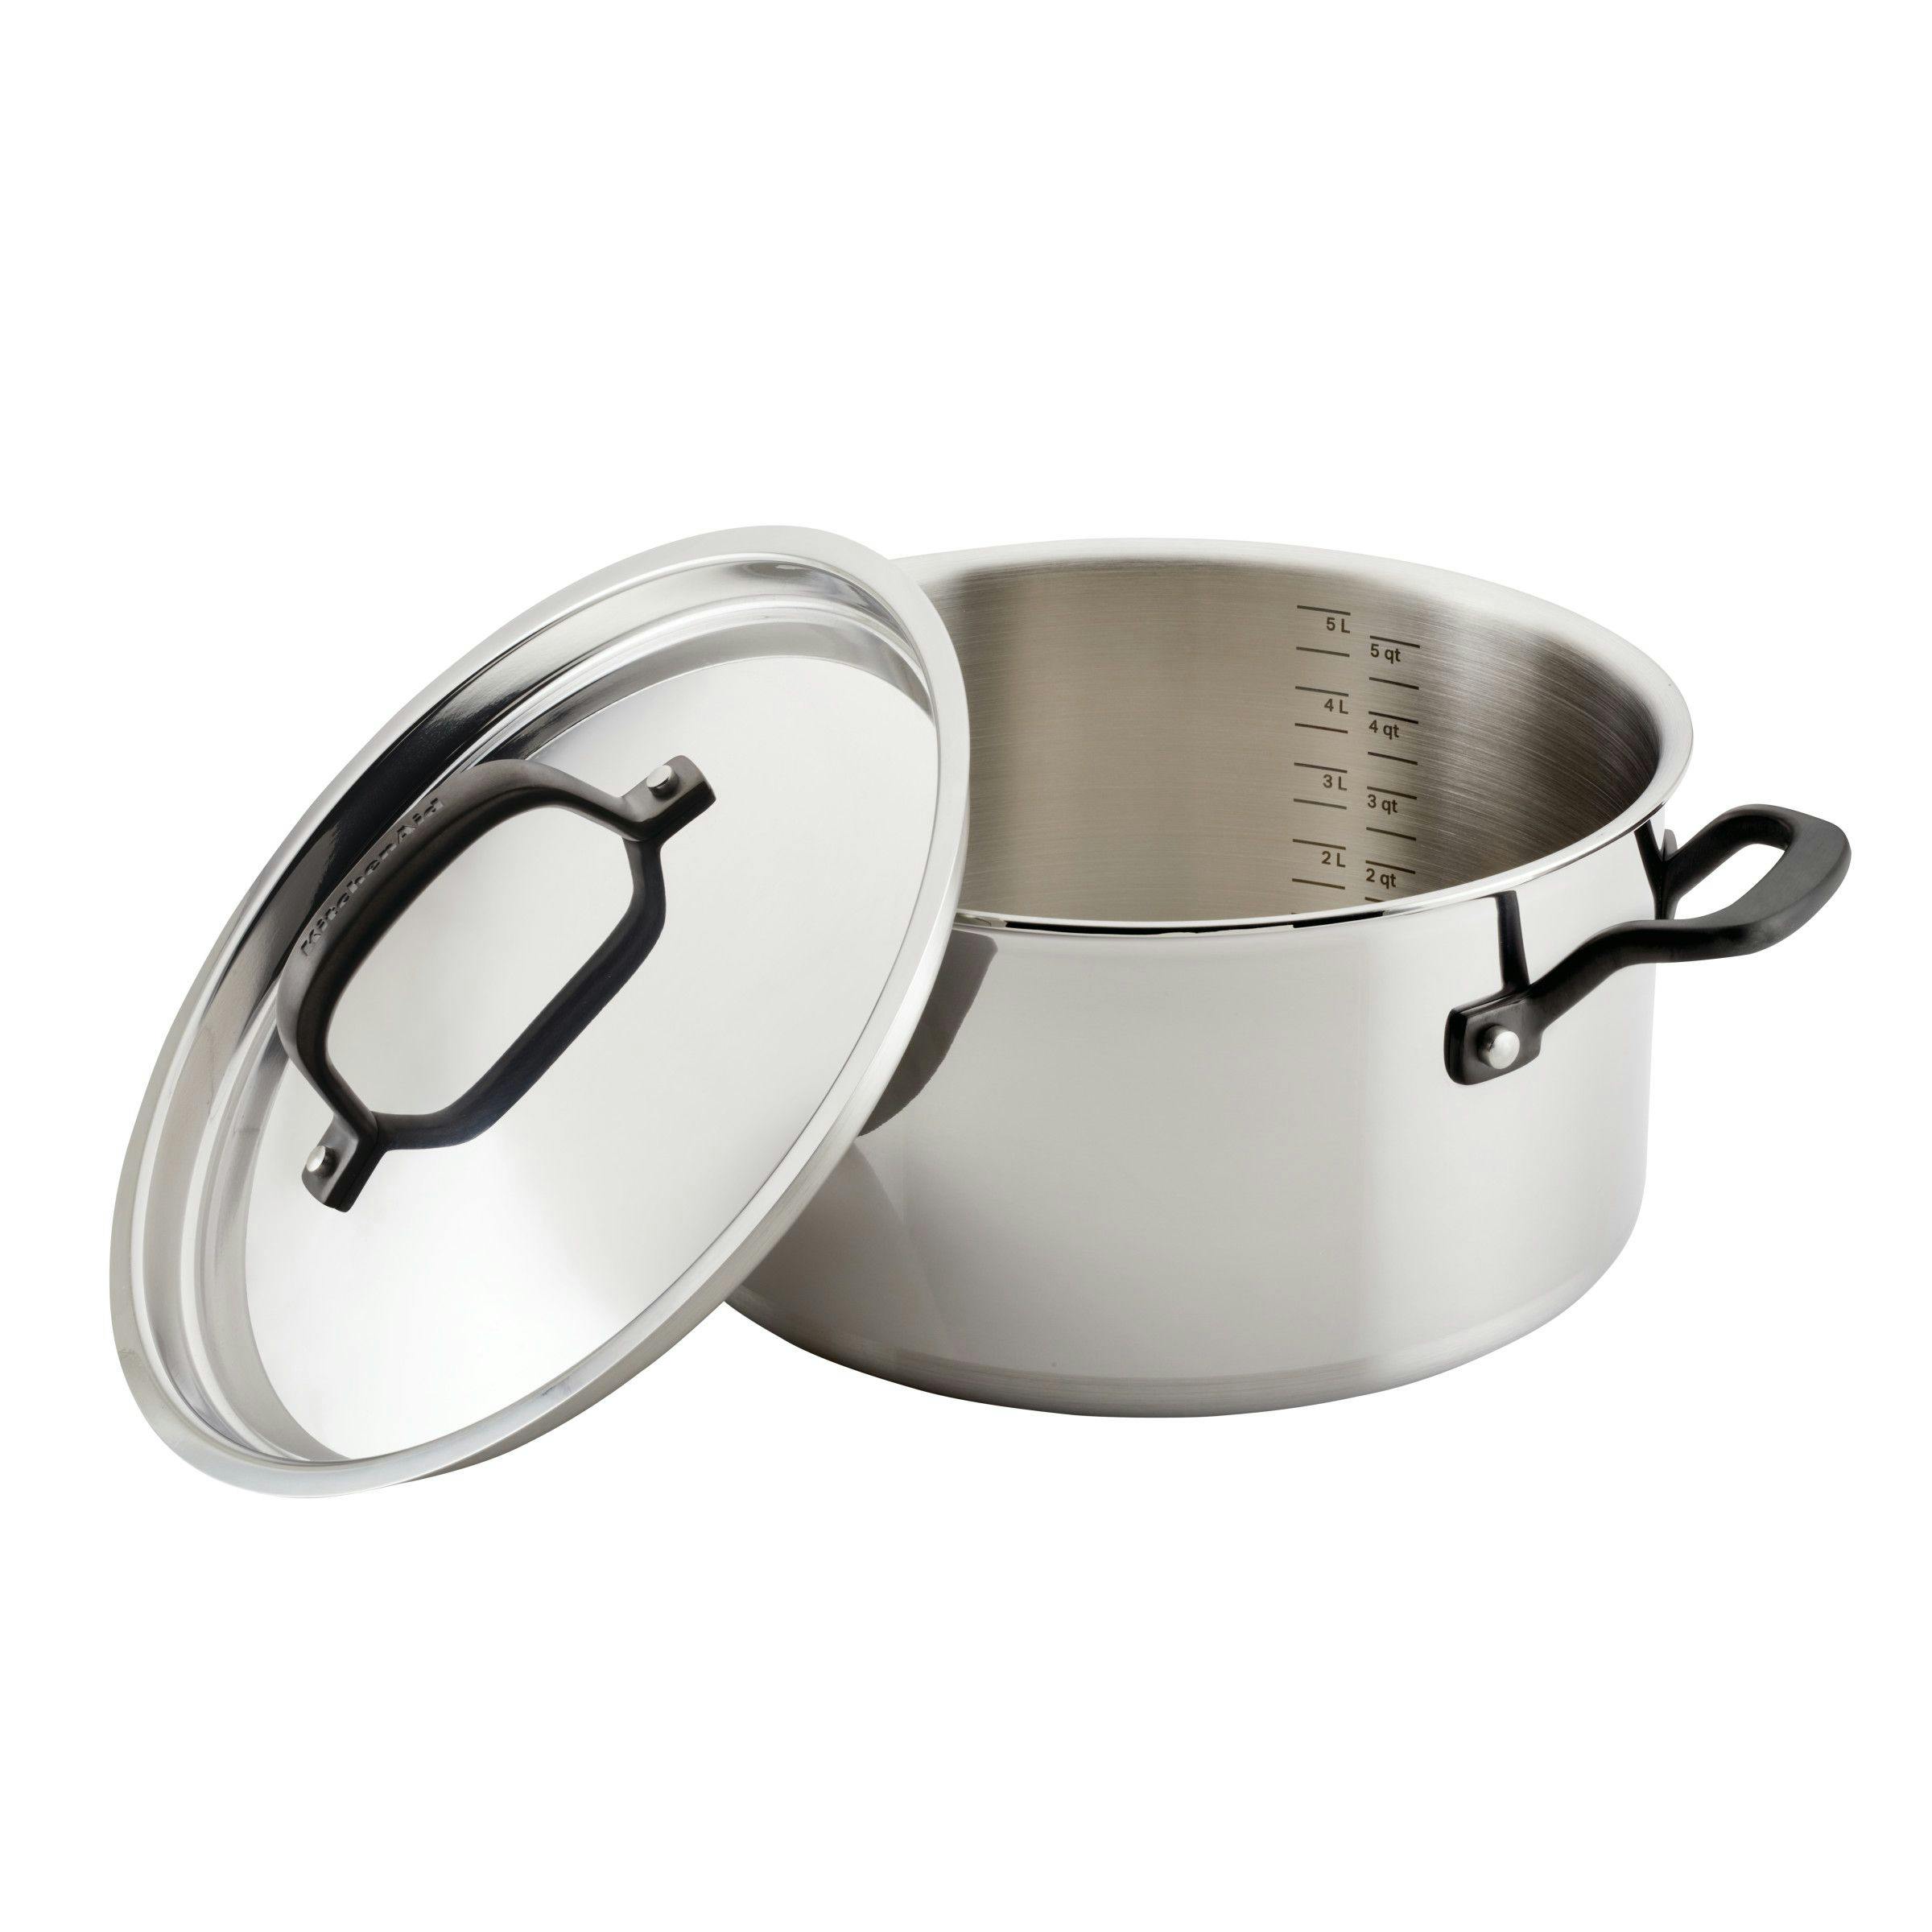 KitchenAid 5-Ply Clad Stainless Steel Induction Stockpot with Lid, 6-Quart, Polished Stainless Steel